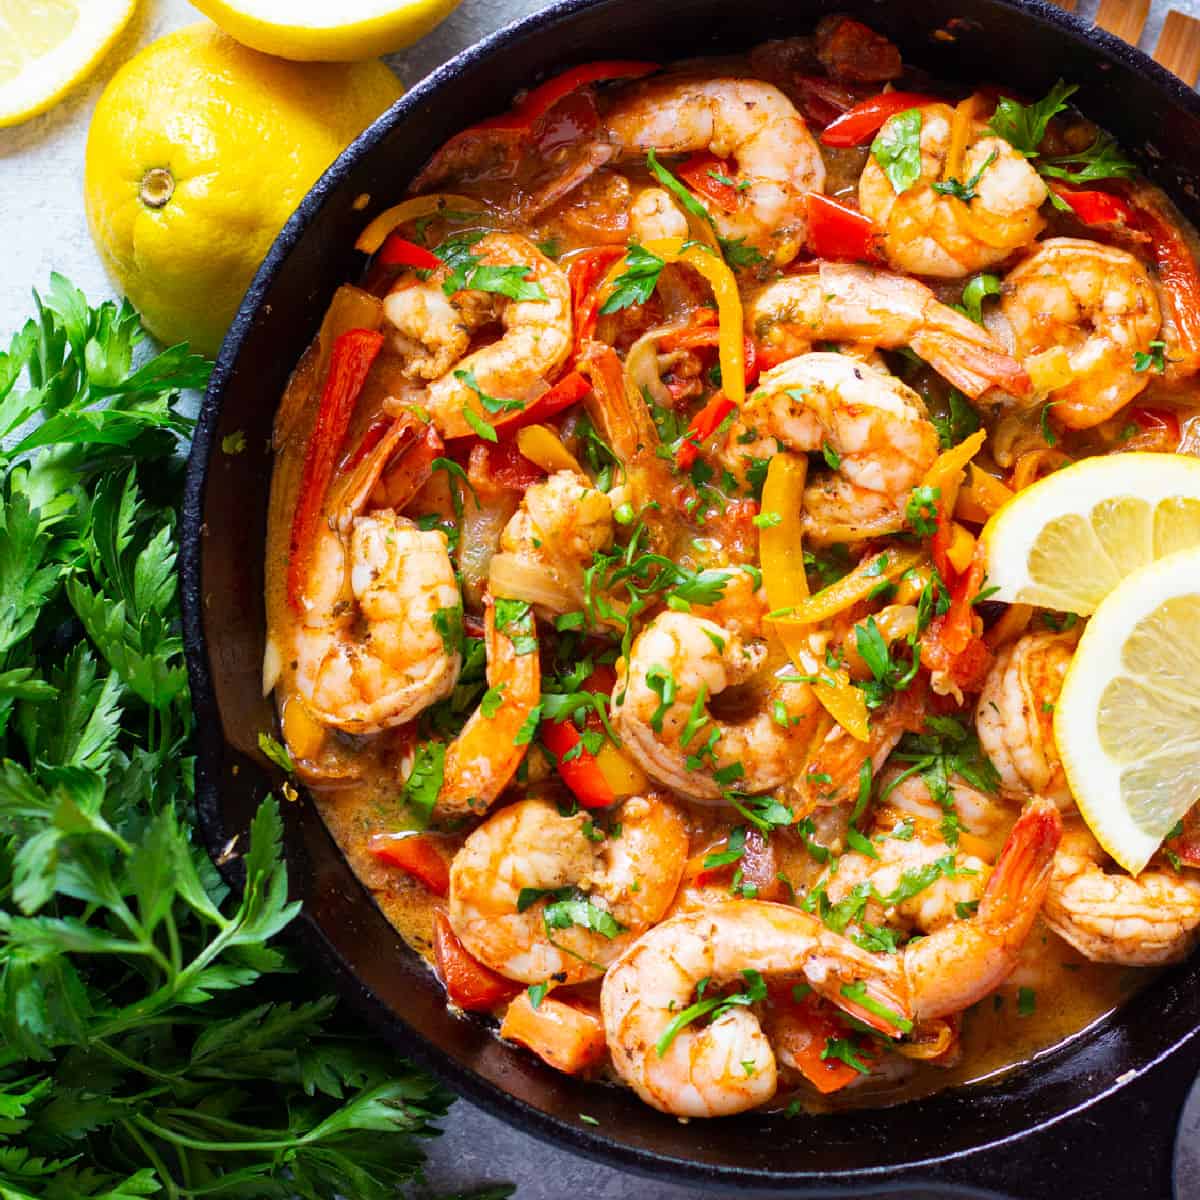 This Mediterranean style shrimp recipe is bursting with vibrant flavors. Large shrimp marinated with spices, garlic and olive oil, then cooked in a delicious tomato and pepper sauce results in one of the tastiest 20-minute dinners you'll ever find!
